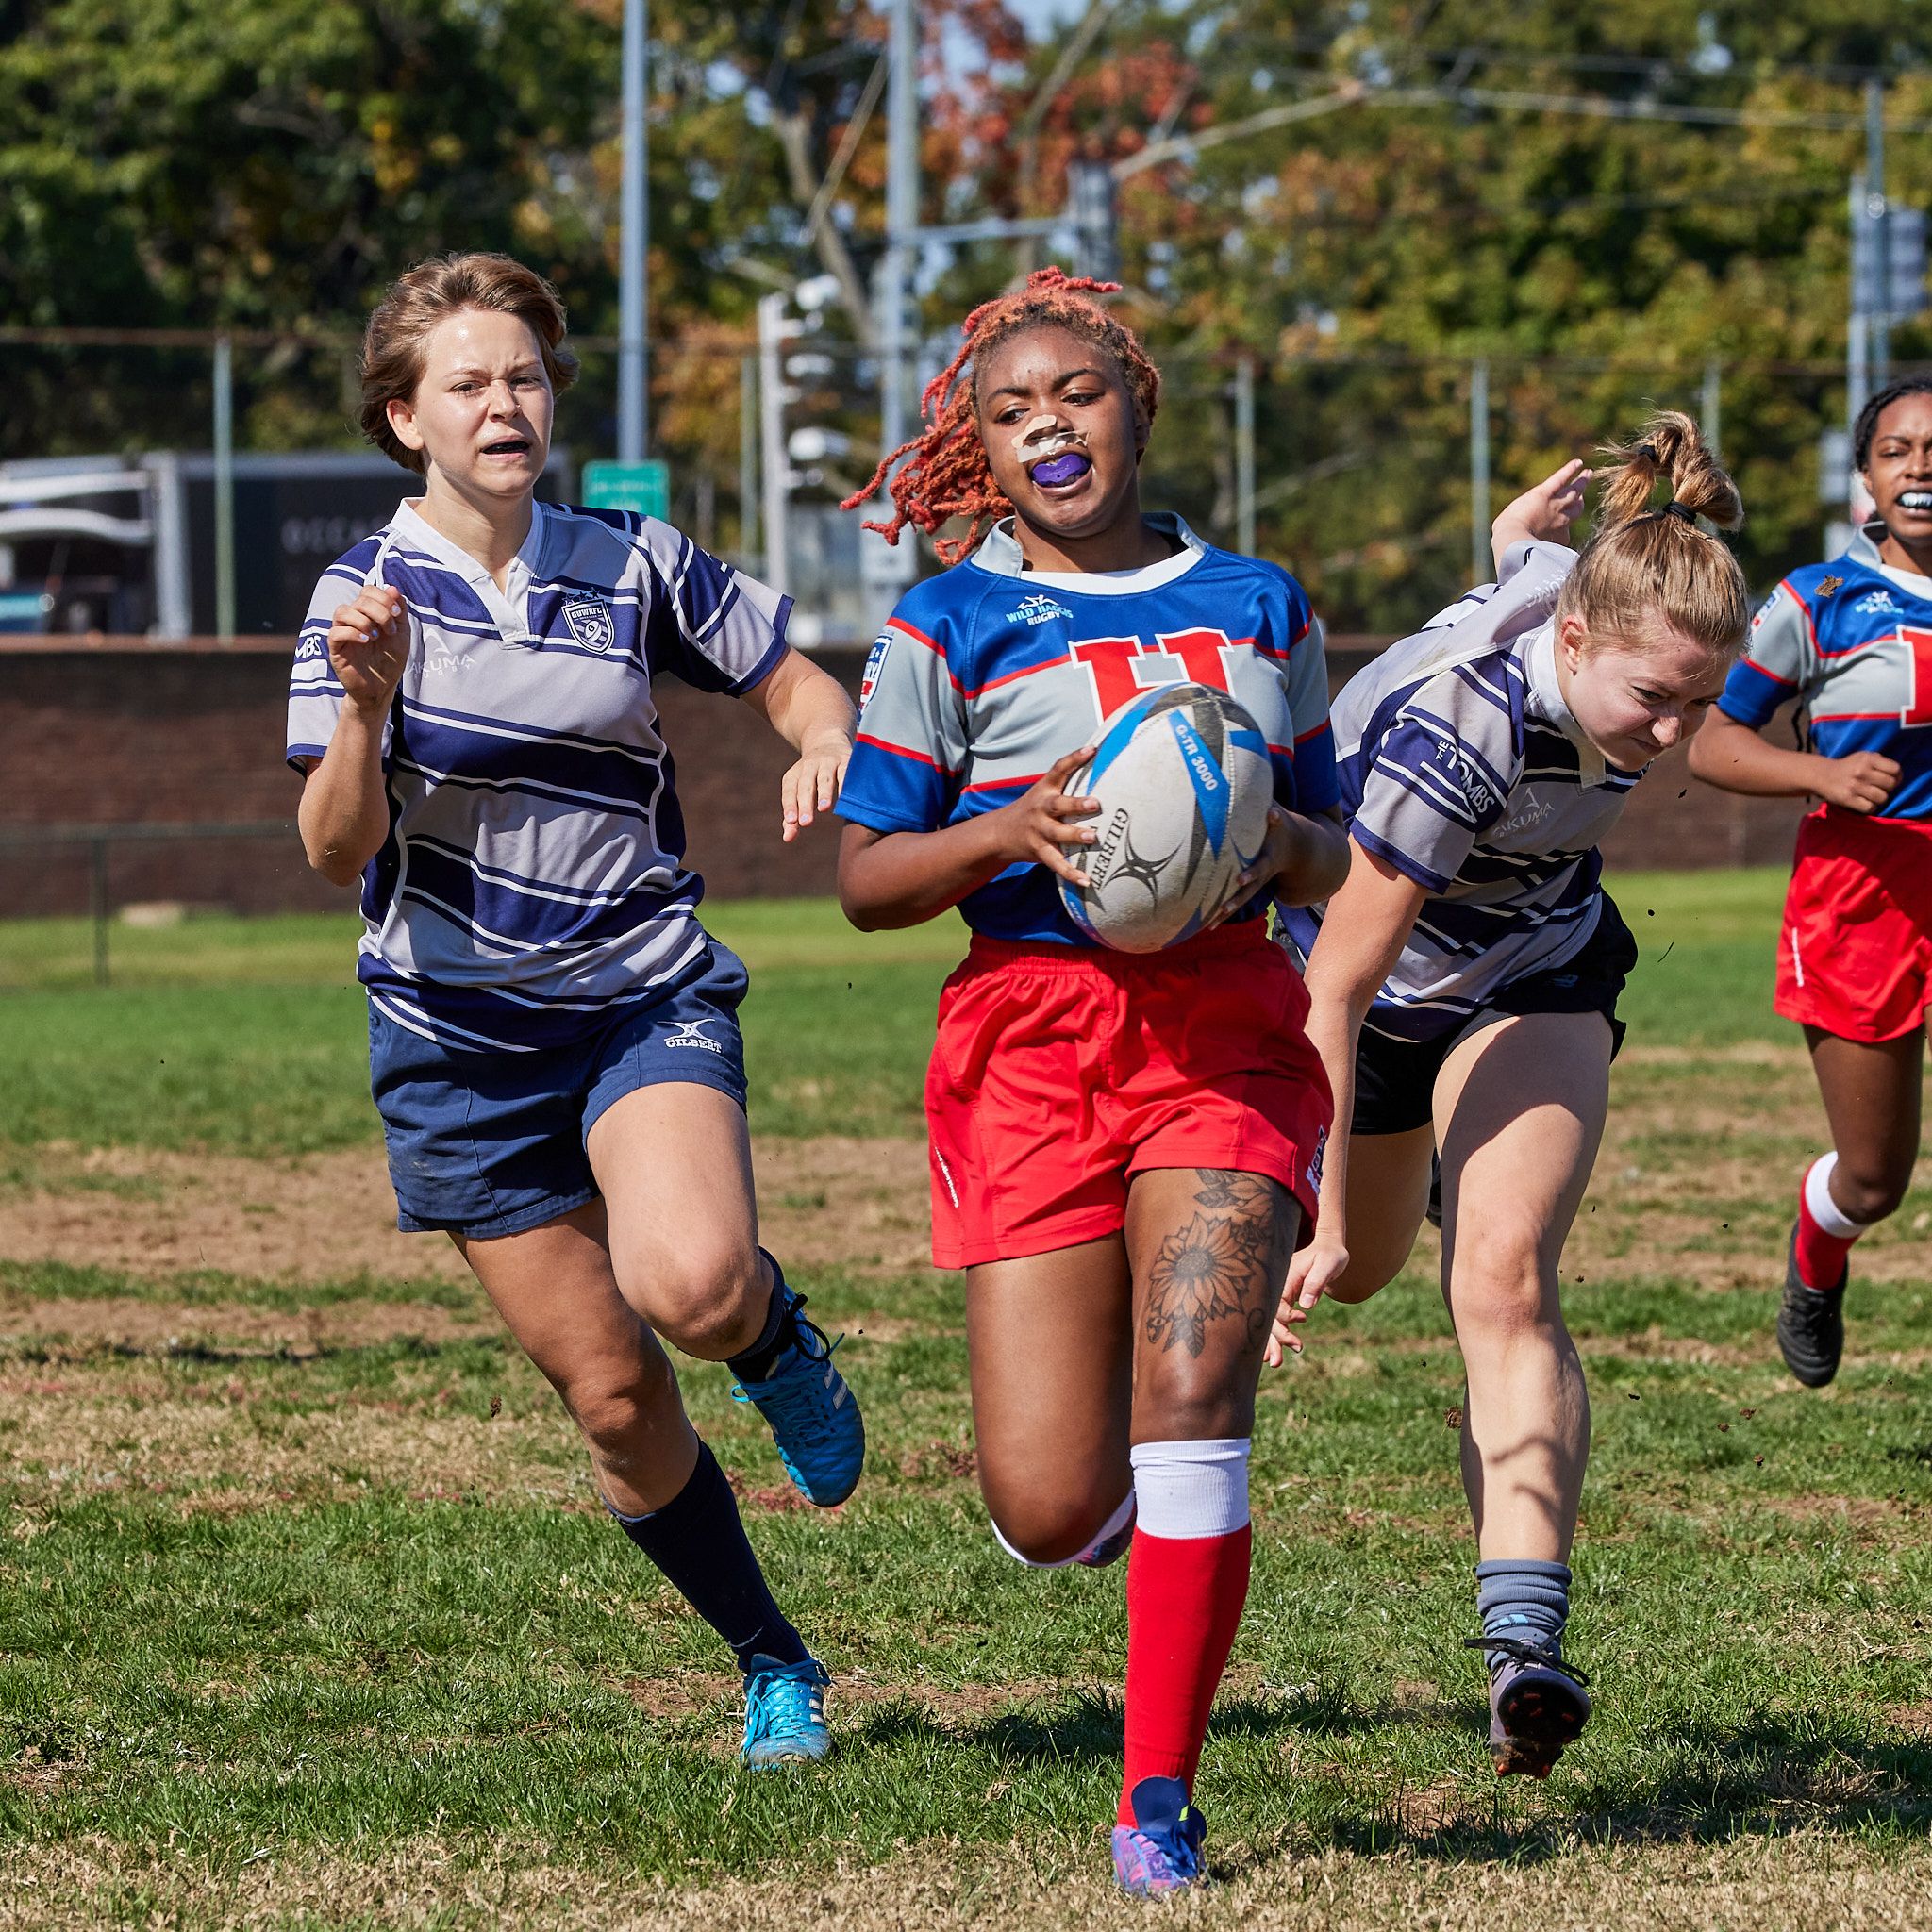 Howard University's Te'Vonya Jeter brings the ball in for a touchdown during a heated Rugby match.